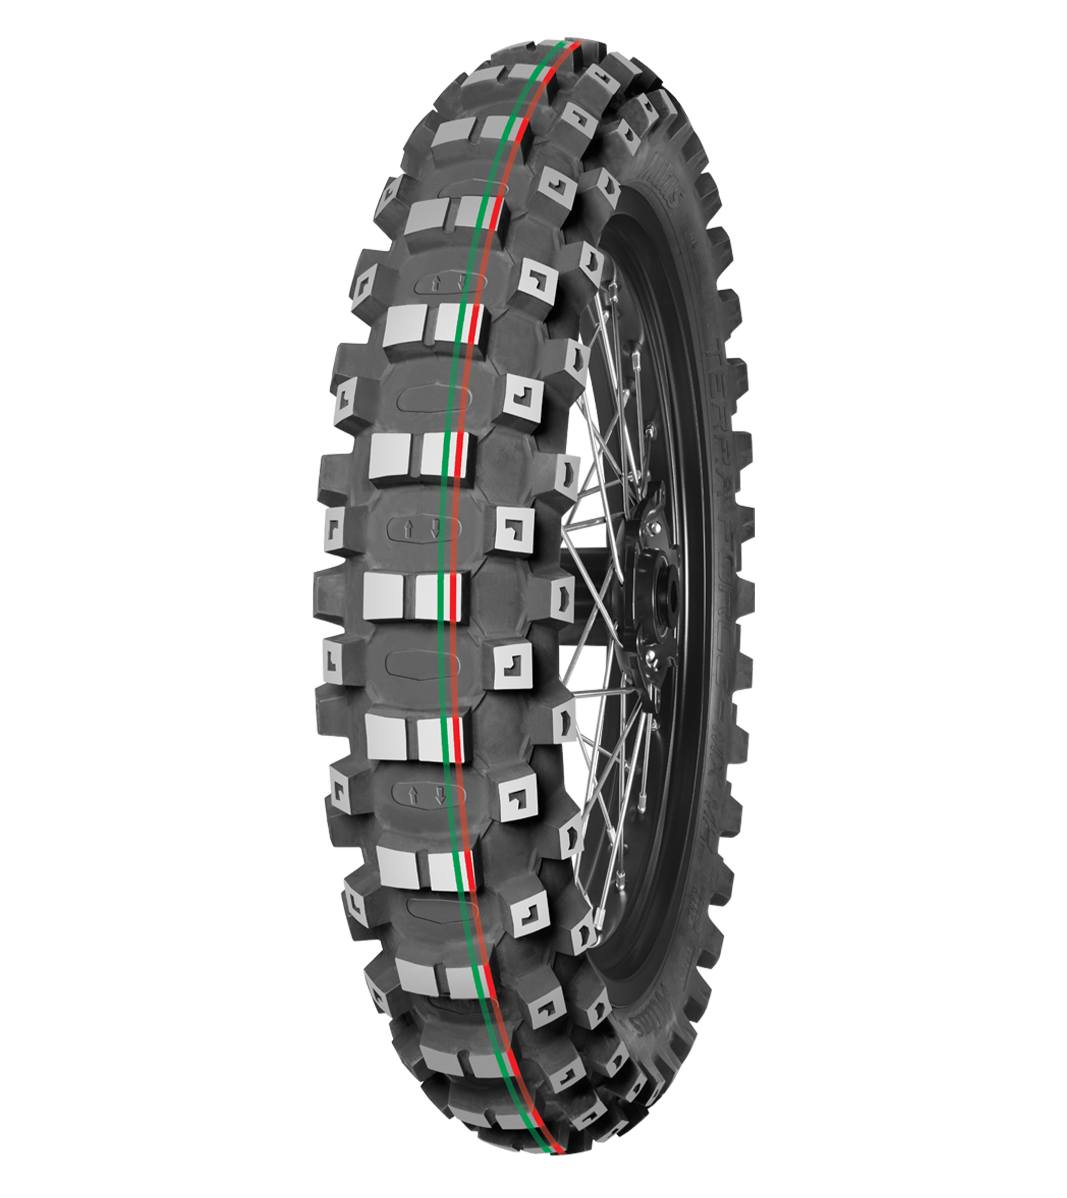 Mitas TERRA FORCE-MX MH 90/100-16 Motocross Competition Off-Road MEDIUM TO HARD 51M Red &amp; Green Tube Rear Tire, 226083, 90/100-16, Motocross, Motocross Competition, Off-Road, Rear, Terra Force, Terra Force-MX MH, Trail, Tires - Imported and distributed in North &amp; South America by Lindeco Genuine Powersports - Premier Powersports Equipment and Accessories for Motorcycle Enthusiasts, Professional Riders and Dealers.